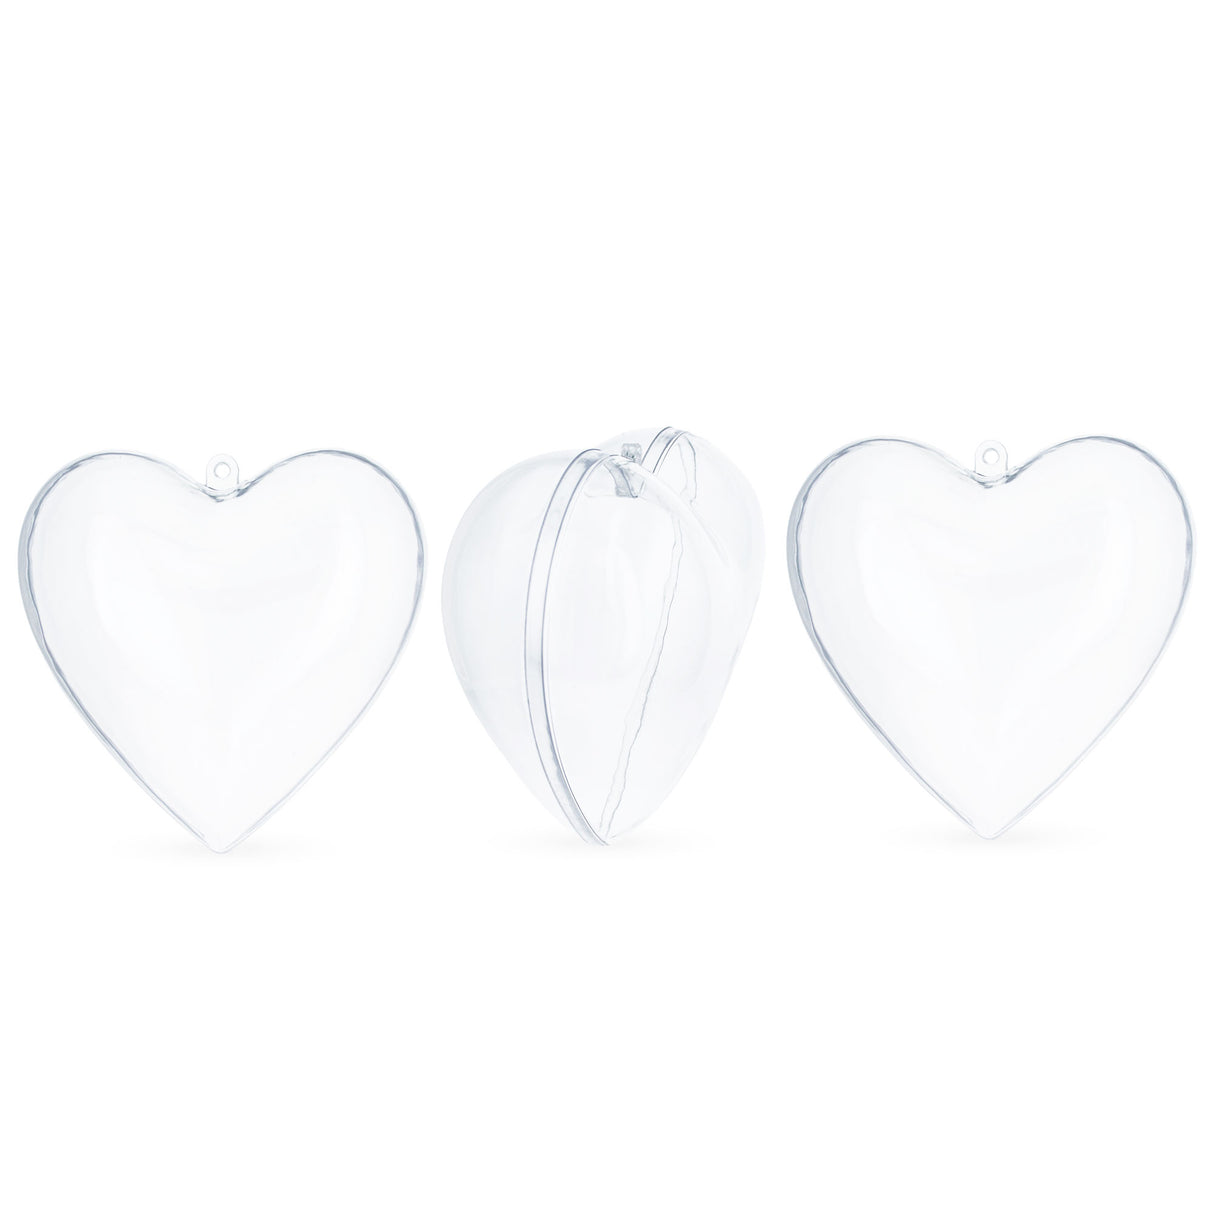 Set of 3 Clear Plastic Hearts Ornaments 2.45 Inches (62 mm) in Clear color, Heart shape